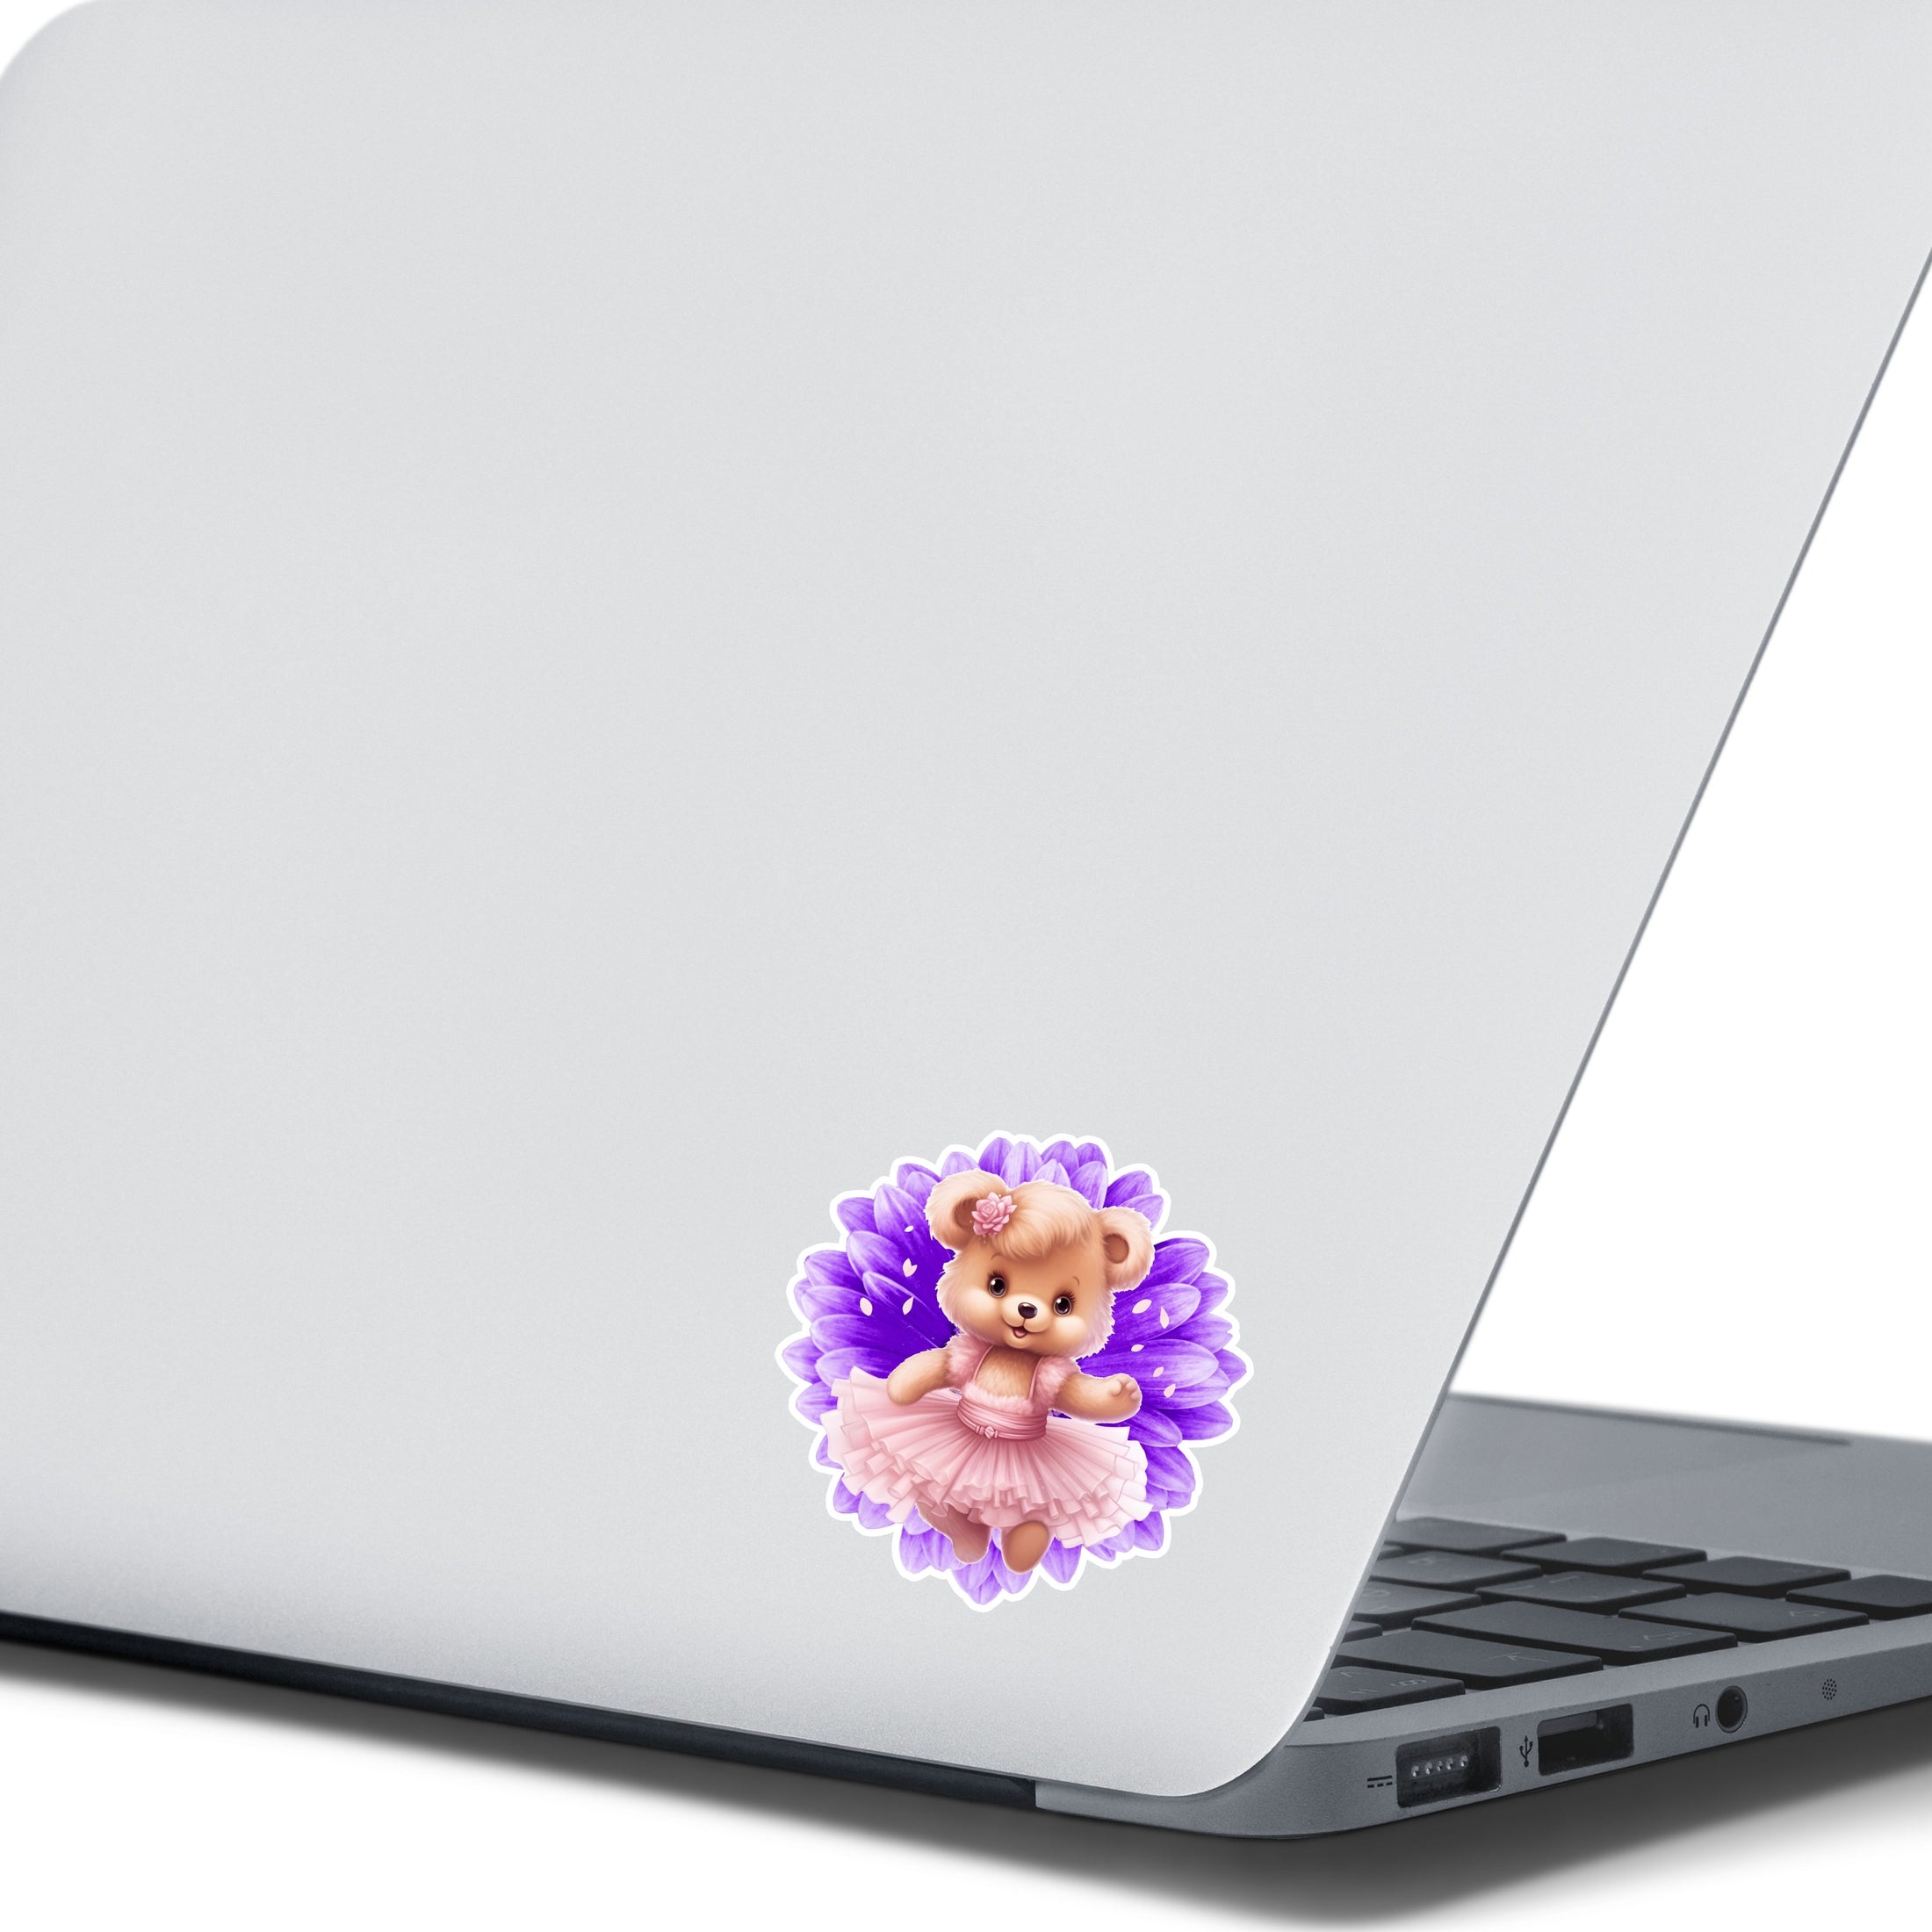 This image shows the teddy bear on purple sticker on the back of an open laptop.